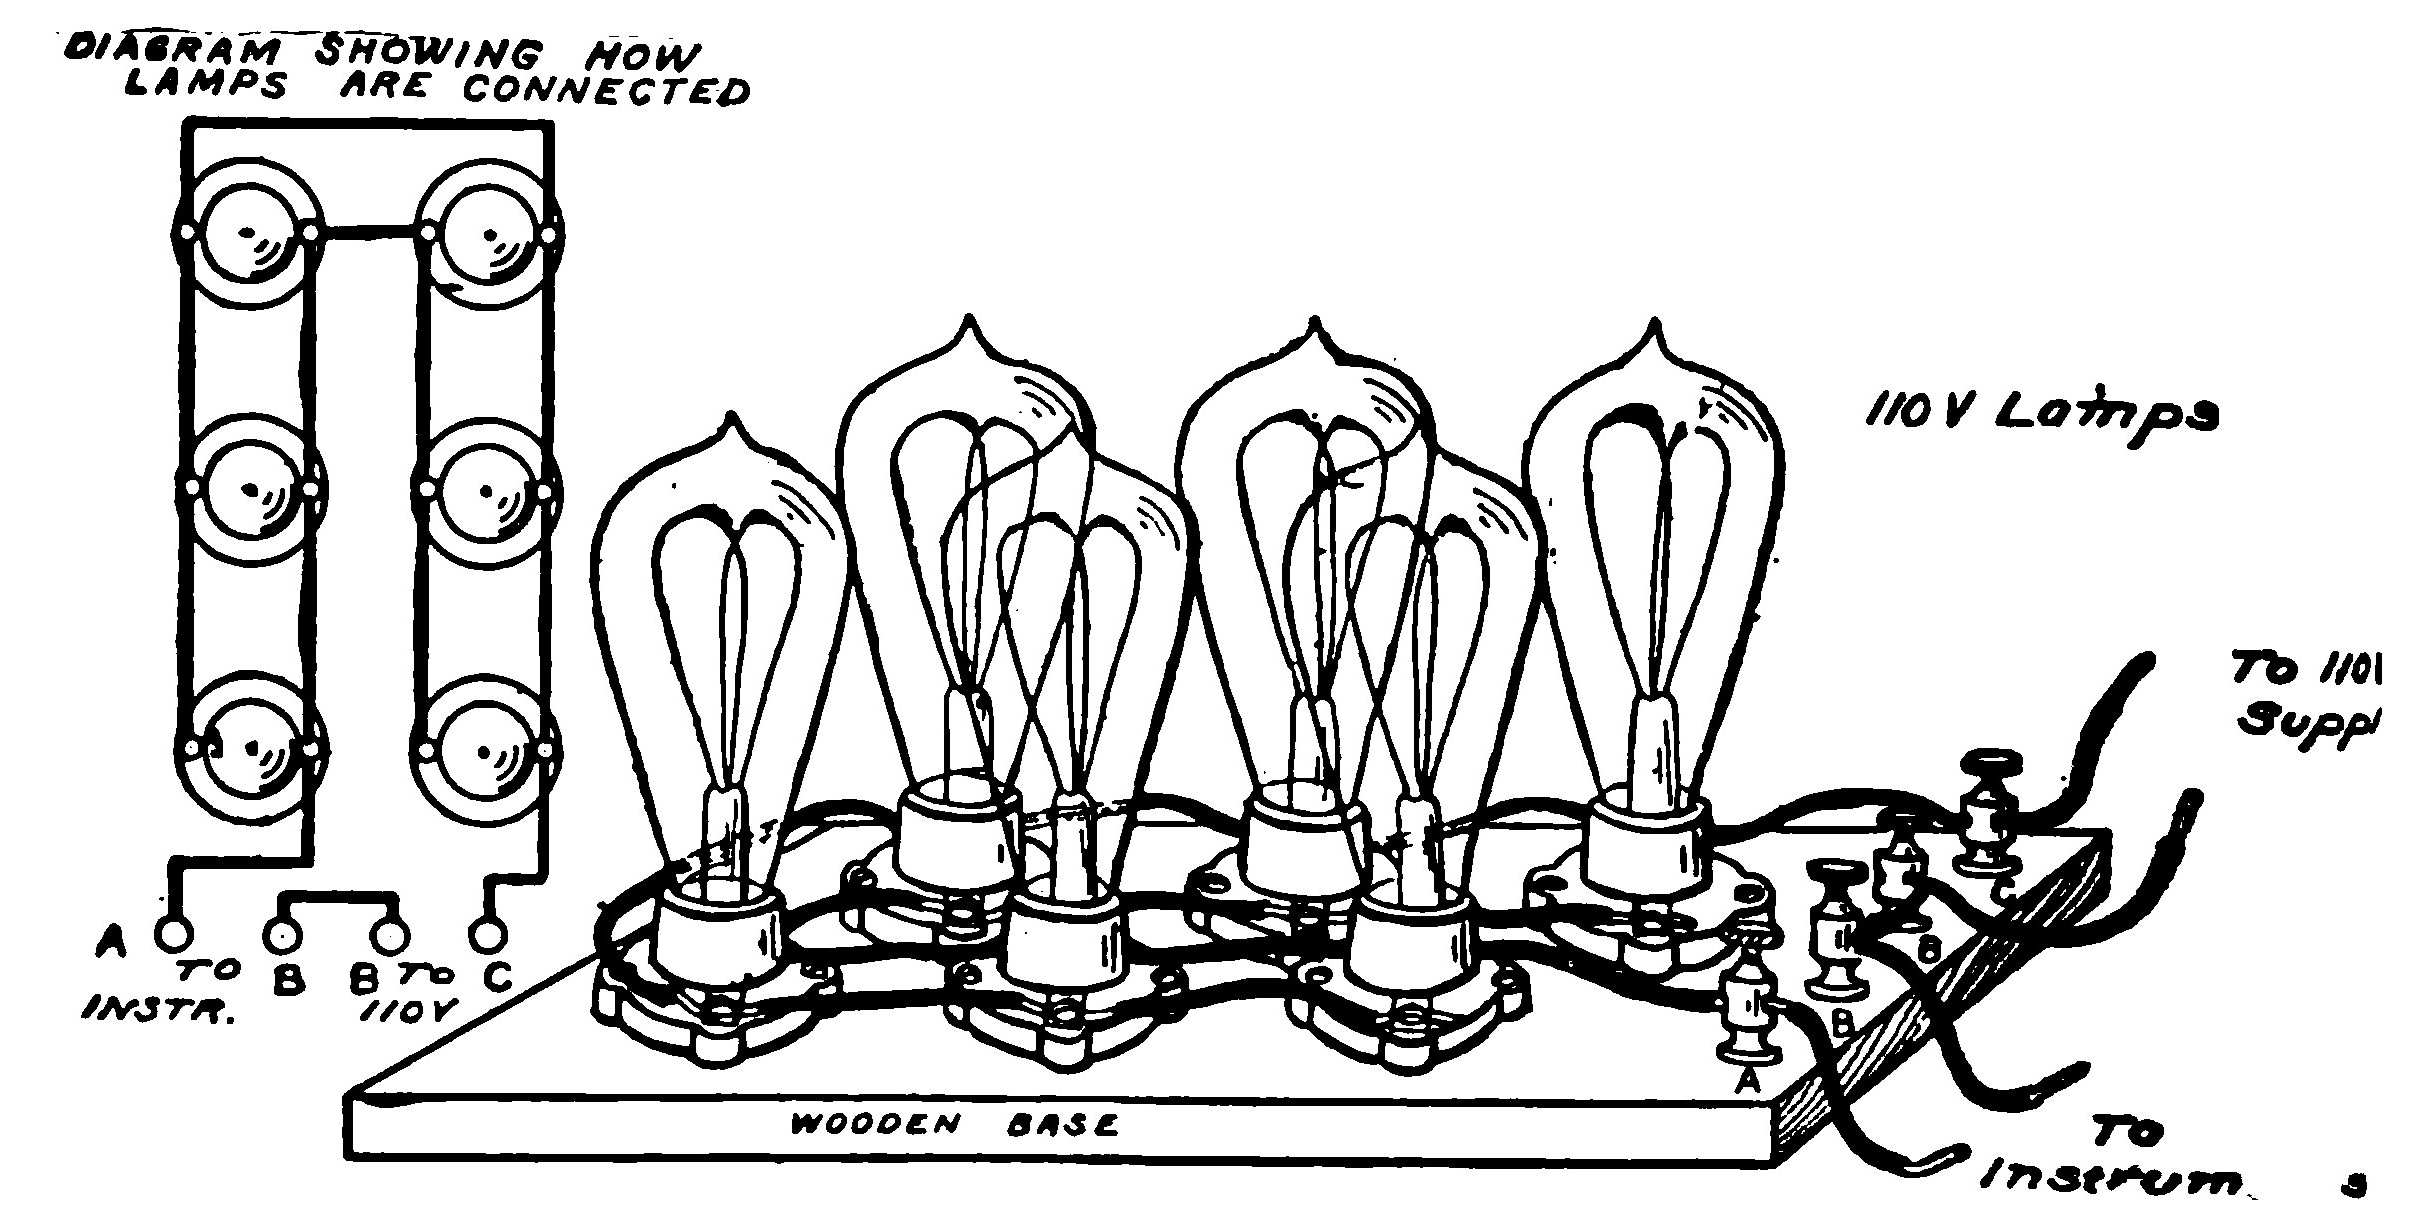 FIG. 48.—A Lamp Bank consisting of a Set of 110-Volt Lamps connected Multiple and arranged to be placed in series with any device it is desired to use on the 110-Volt Current.